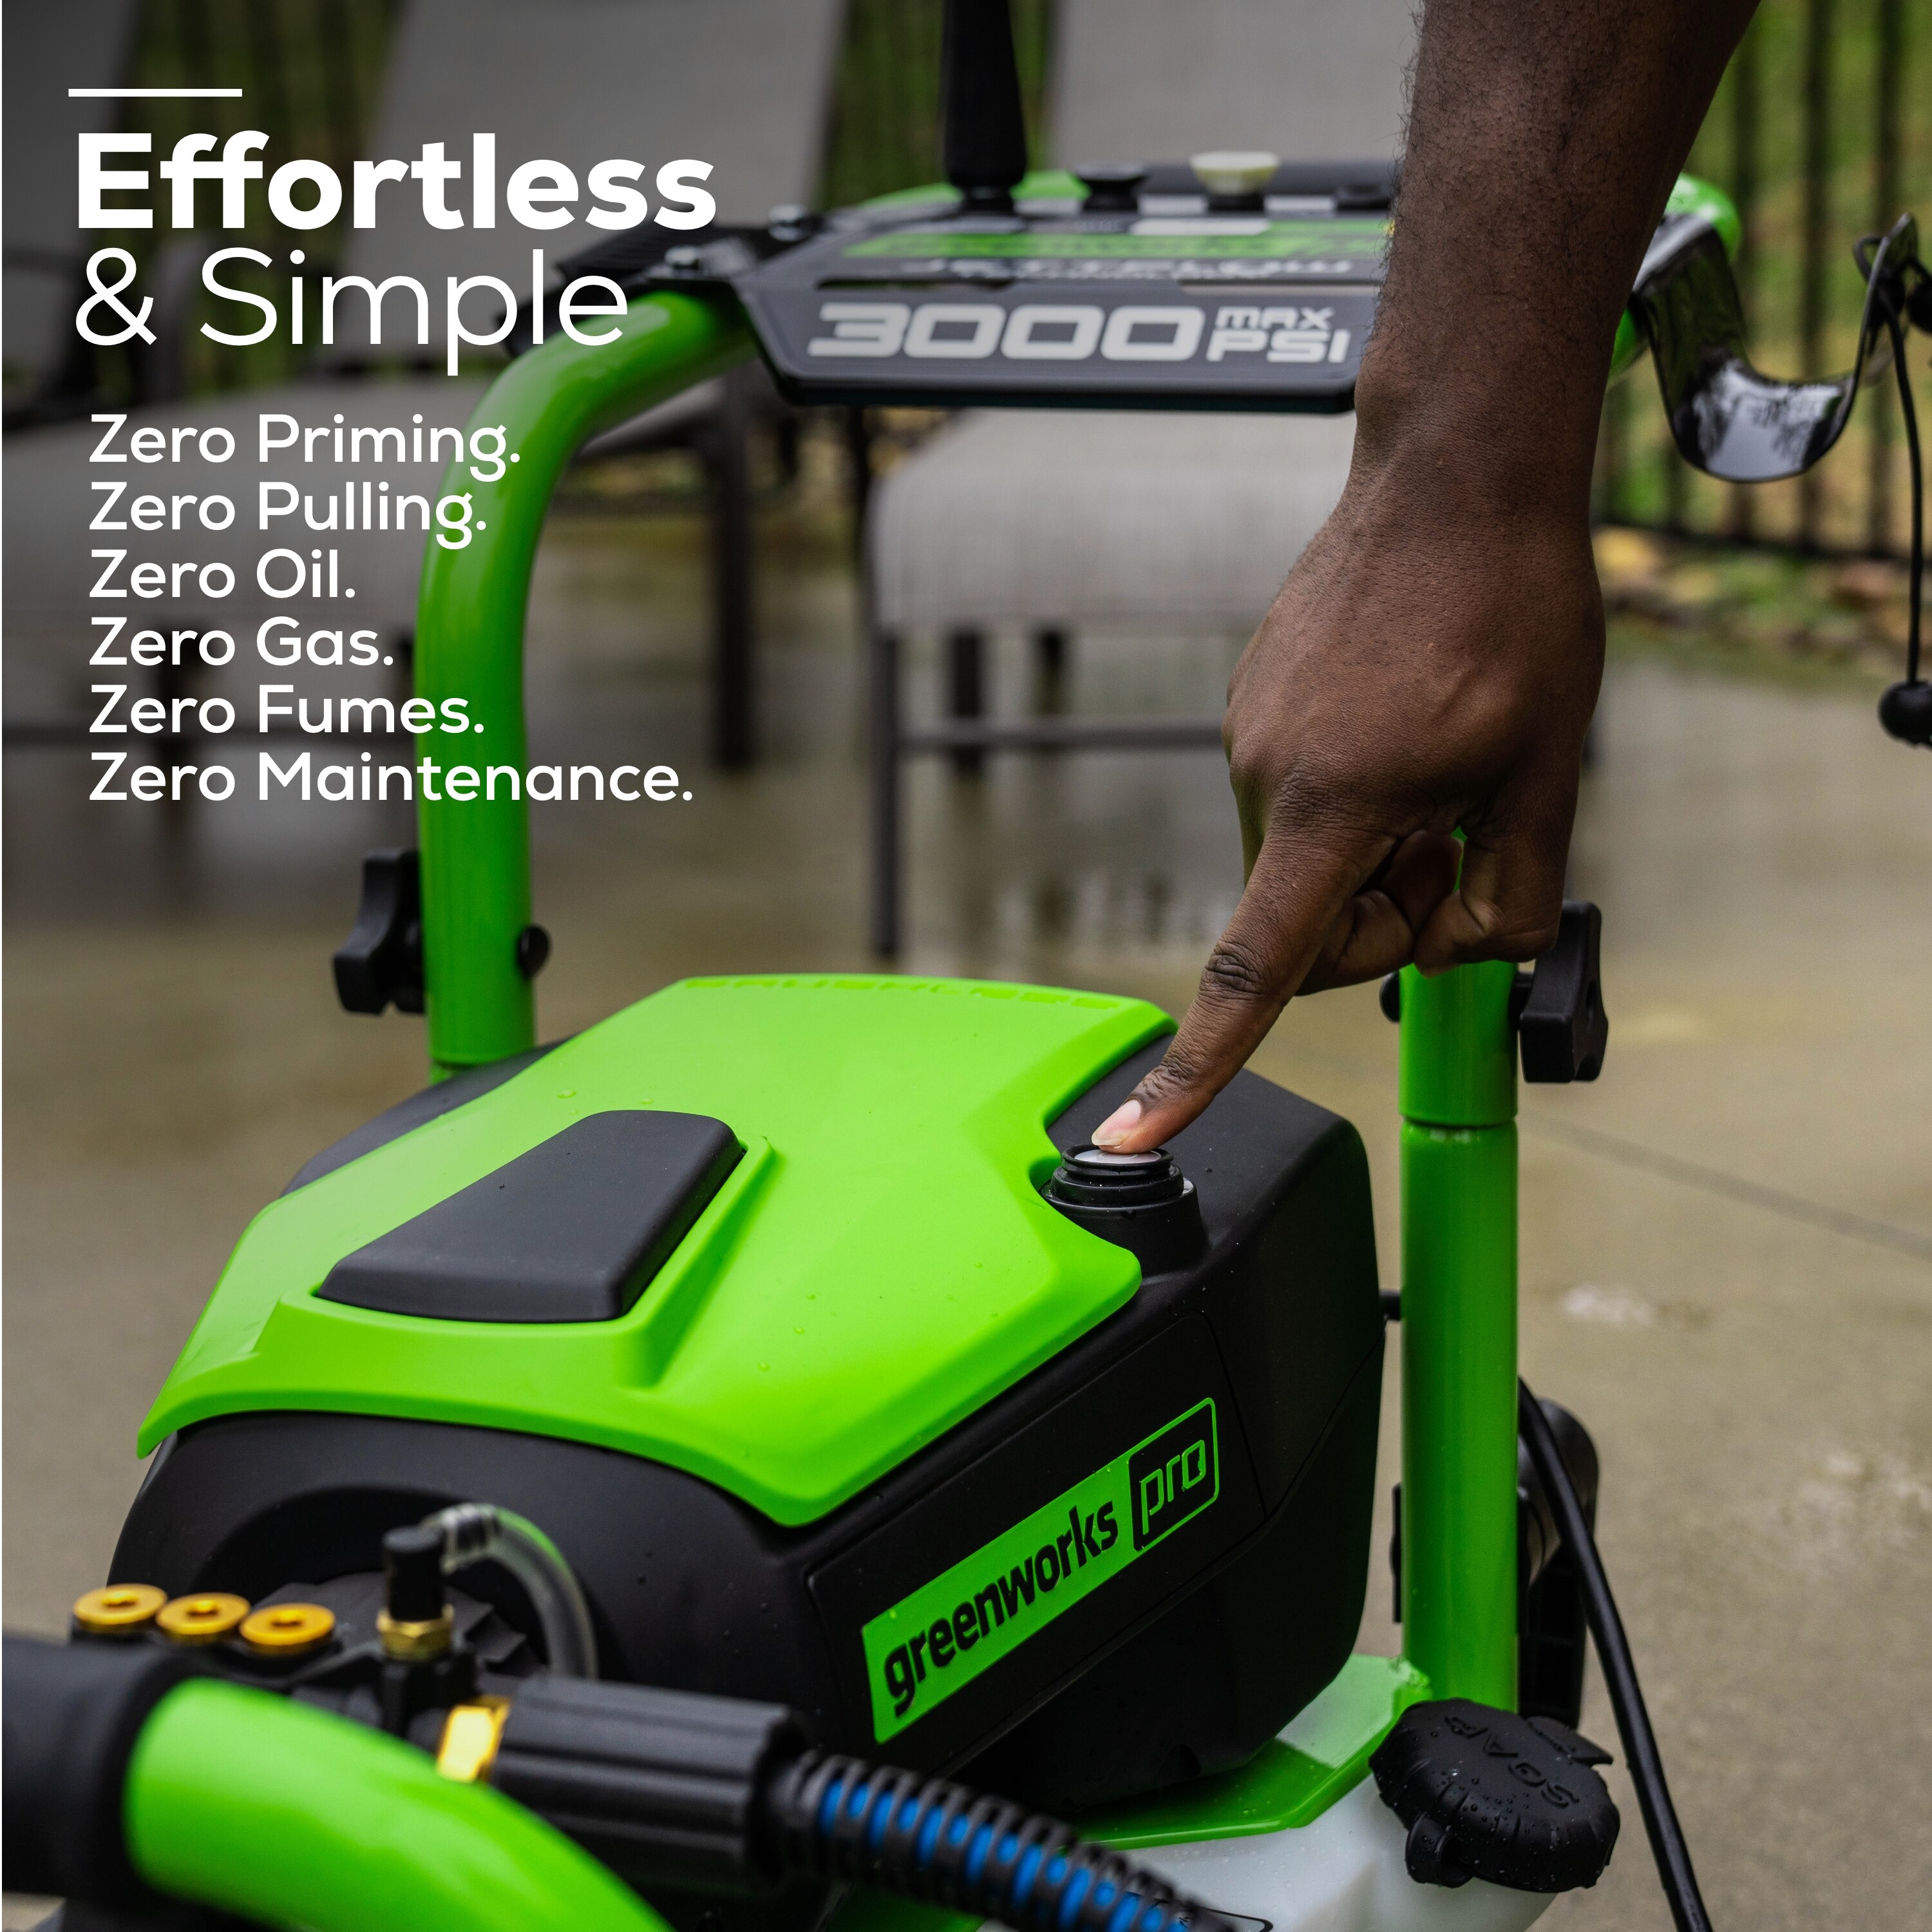 Greenworks 3000 PSI (1.1 GPM) TruBrushless Electric Pressure Washer & High  Pressure Soap Applicator Universal Pressure Washer Attachment & Surface